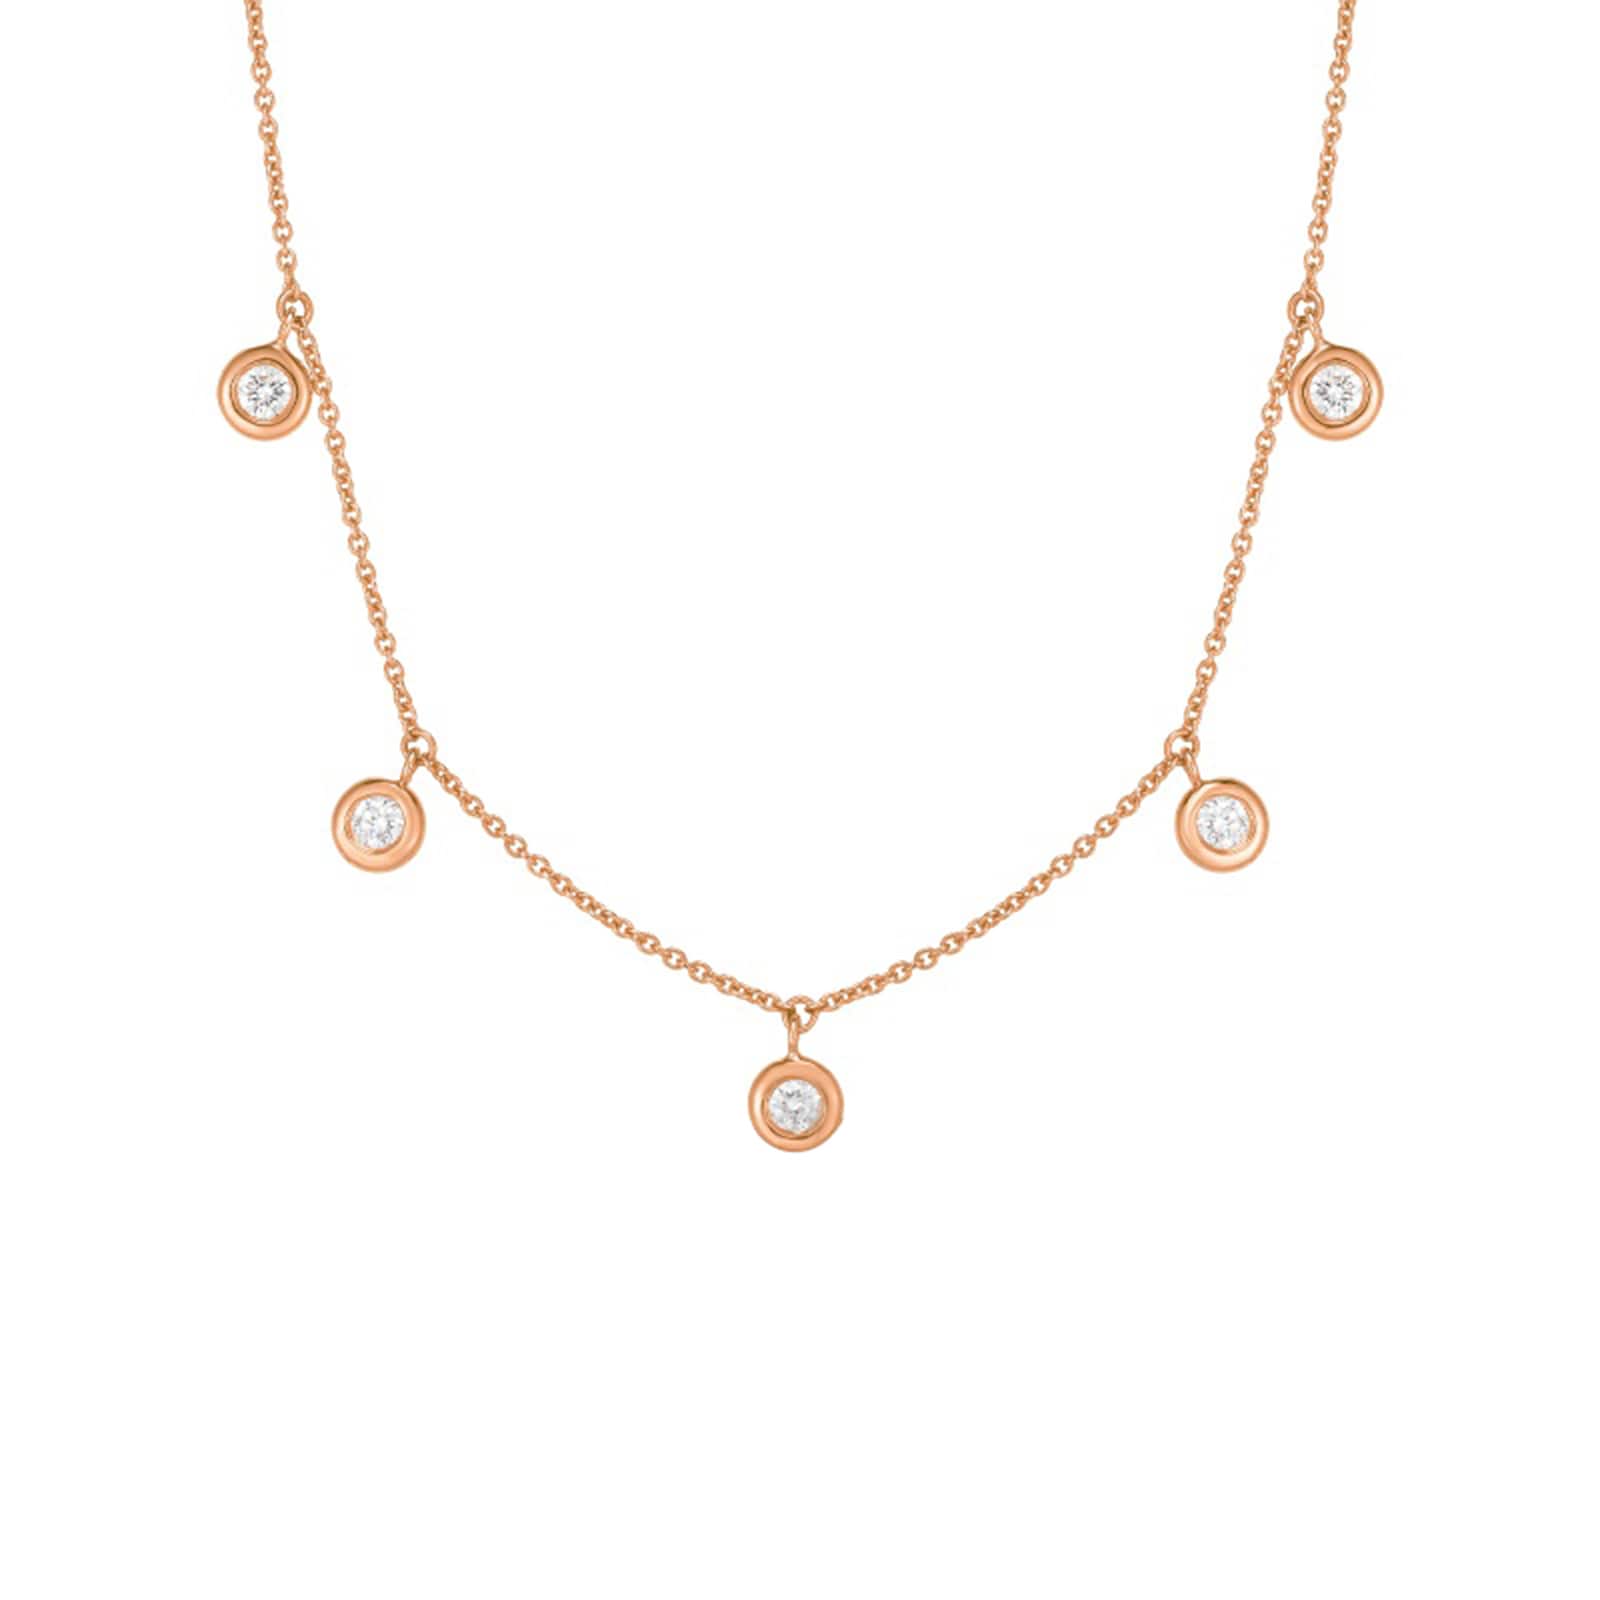 Roberto Coin 18kt Rose Gold Pebble Station Necklace with Diamond Accents |  Ross-Simons